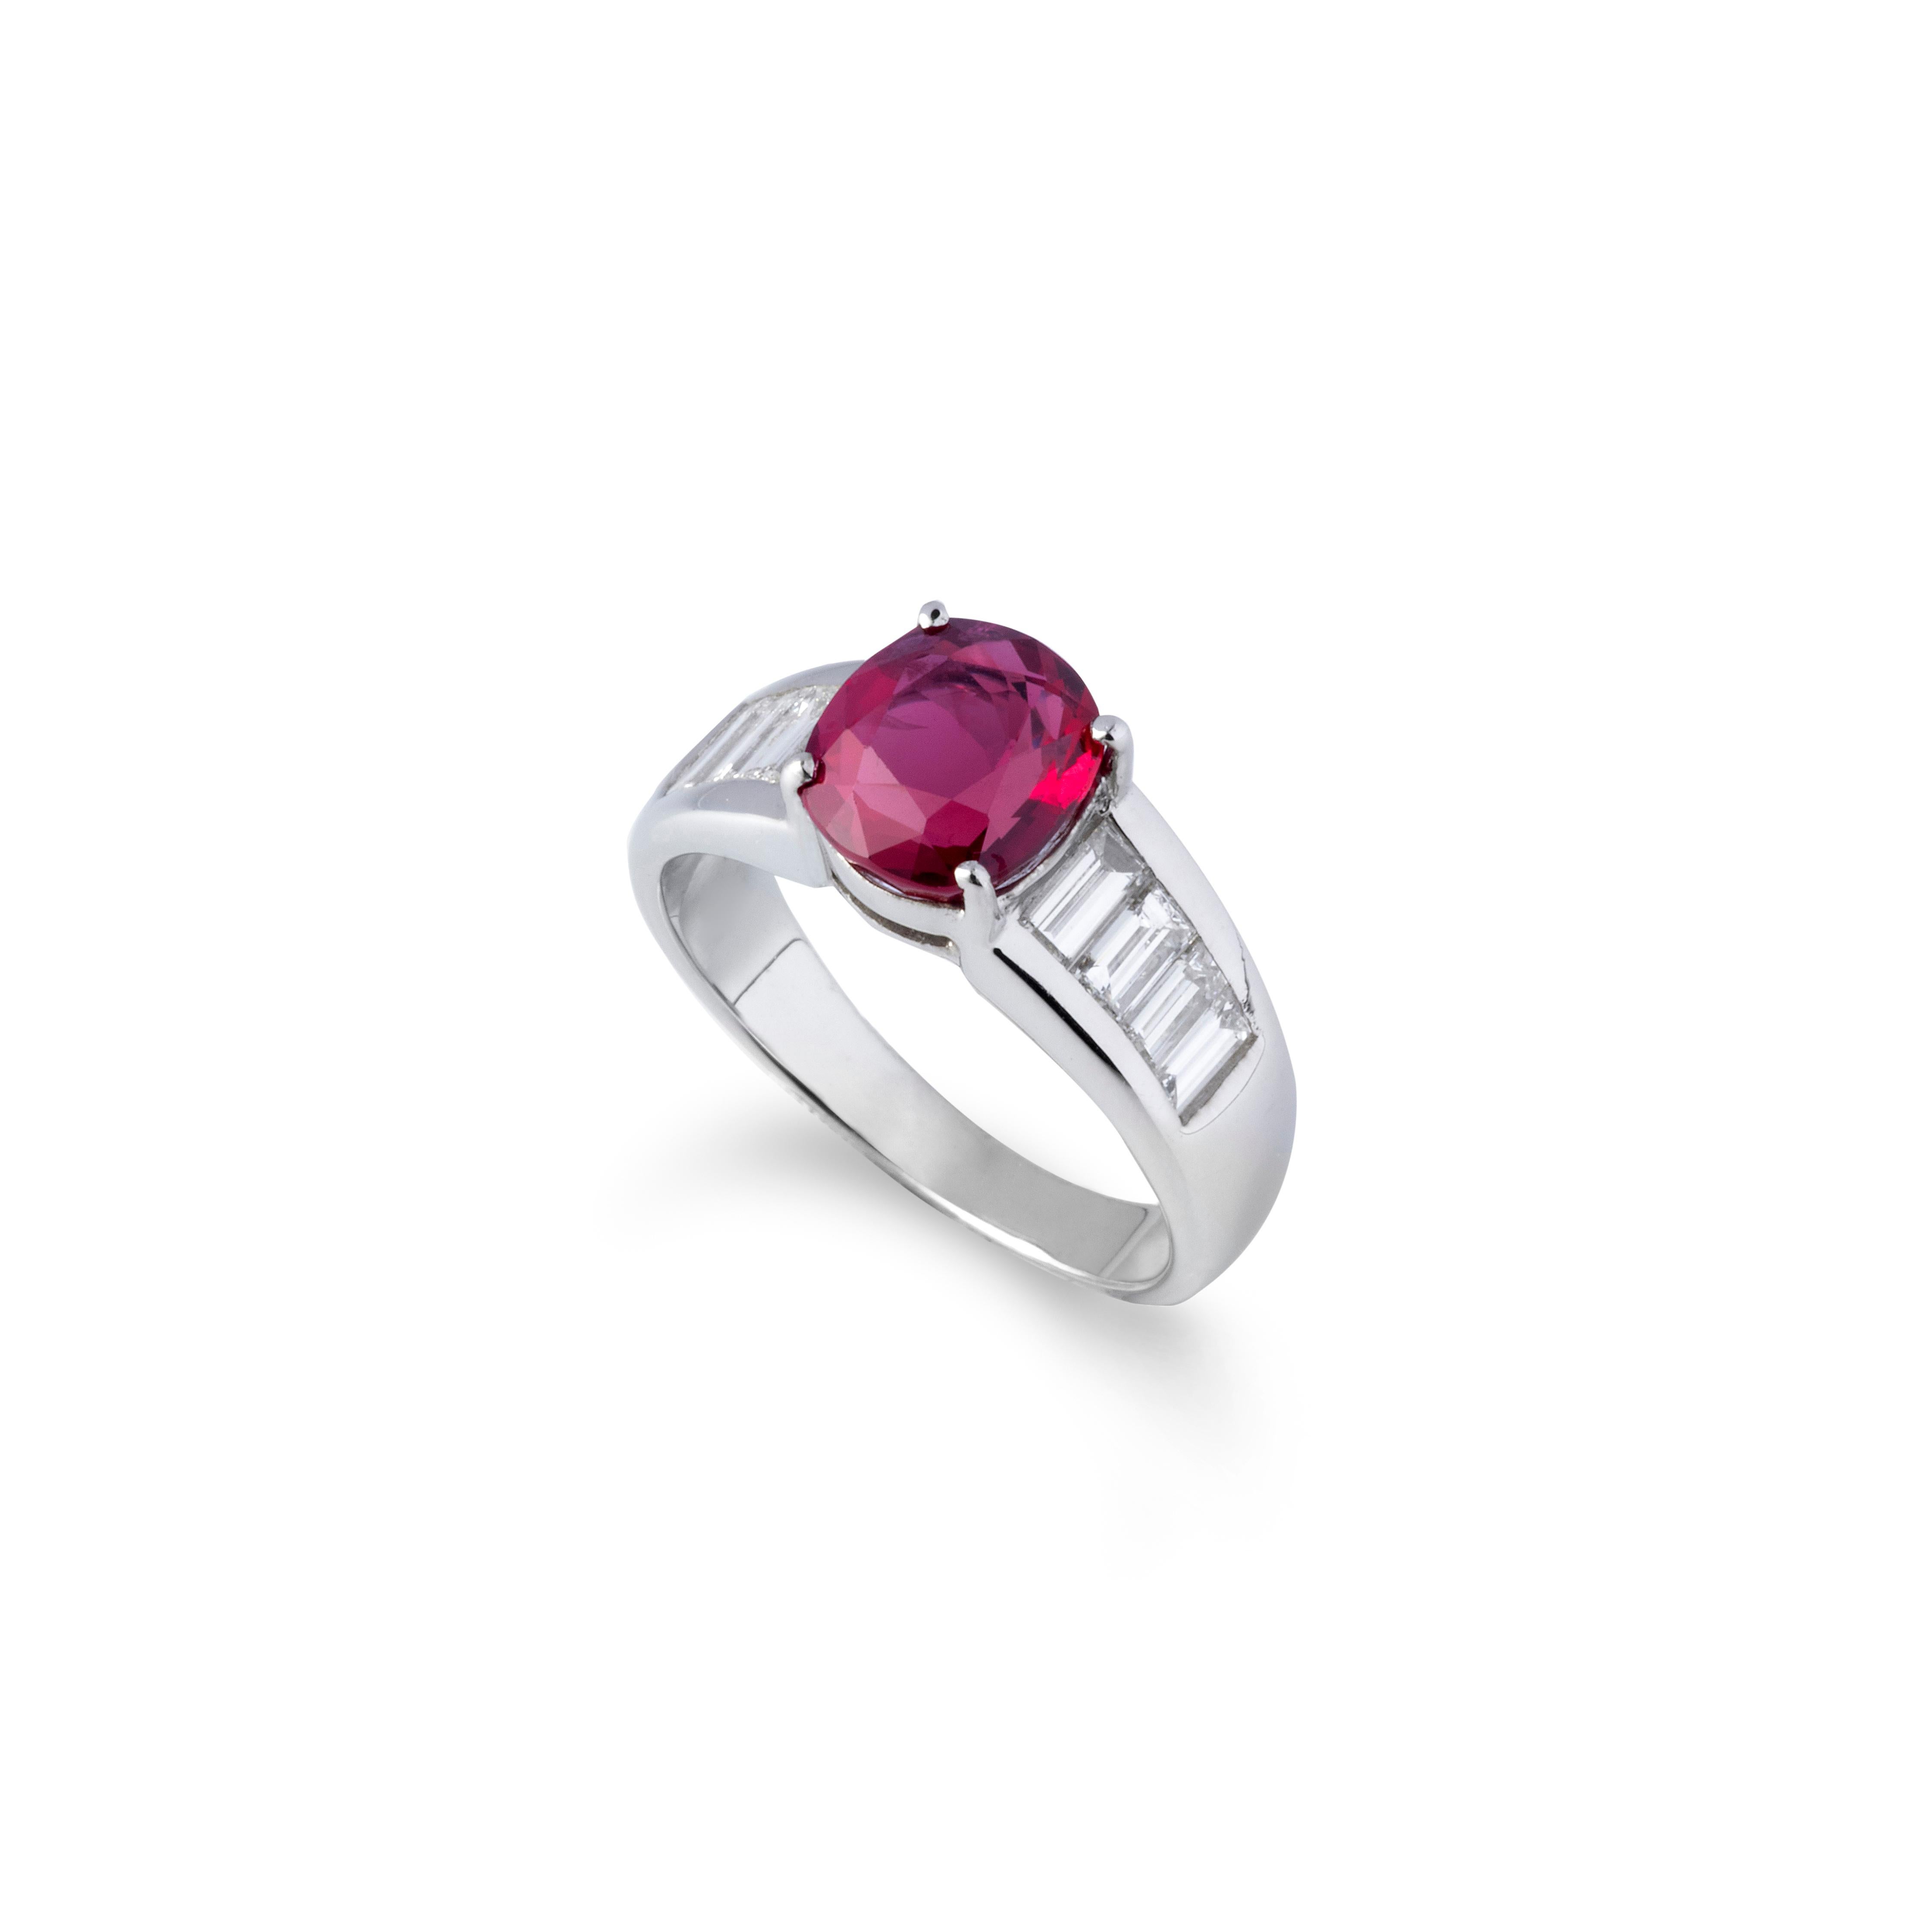 This beautiful 18K white gold fine ruby and diamond ring is special! The piece is accompanied by GRS report of the wonderful and rare 3.21 carat genuine Siam (Thailand) ruby with minimal heat treatment. The color is a typical red seen in many Siam